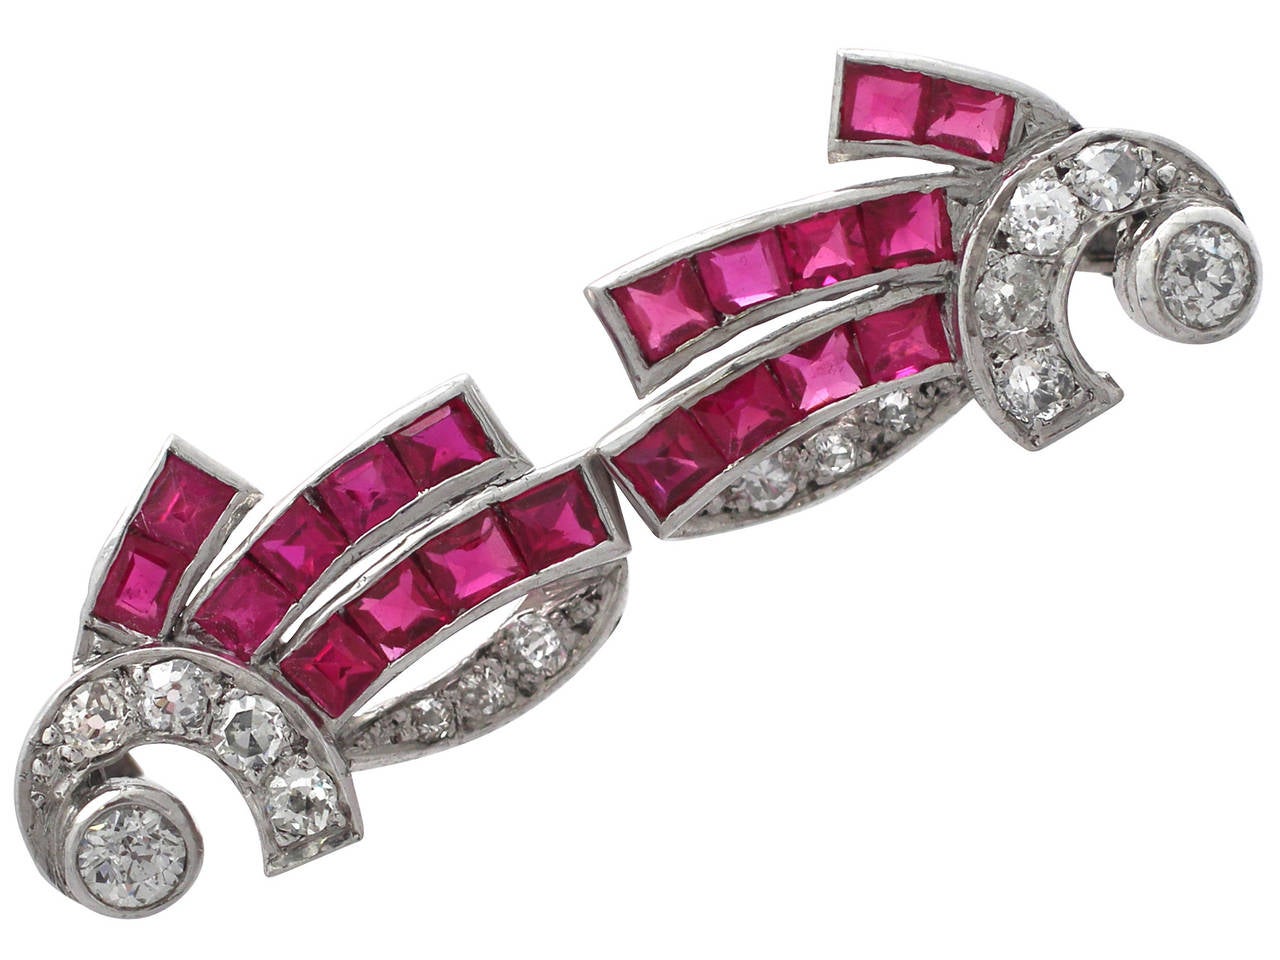 A fine pair of 1.00 carat ruby and 0.48 carat diamond, 14 carat white gold Art Deco style earrings; an addition to our jewelry collections.

These fine Art Deco style ruby earrings have been crafted in 14k white gold.

Each earring has a feature